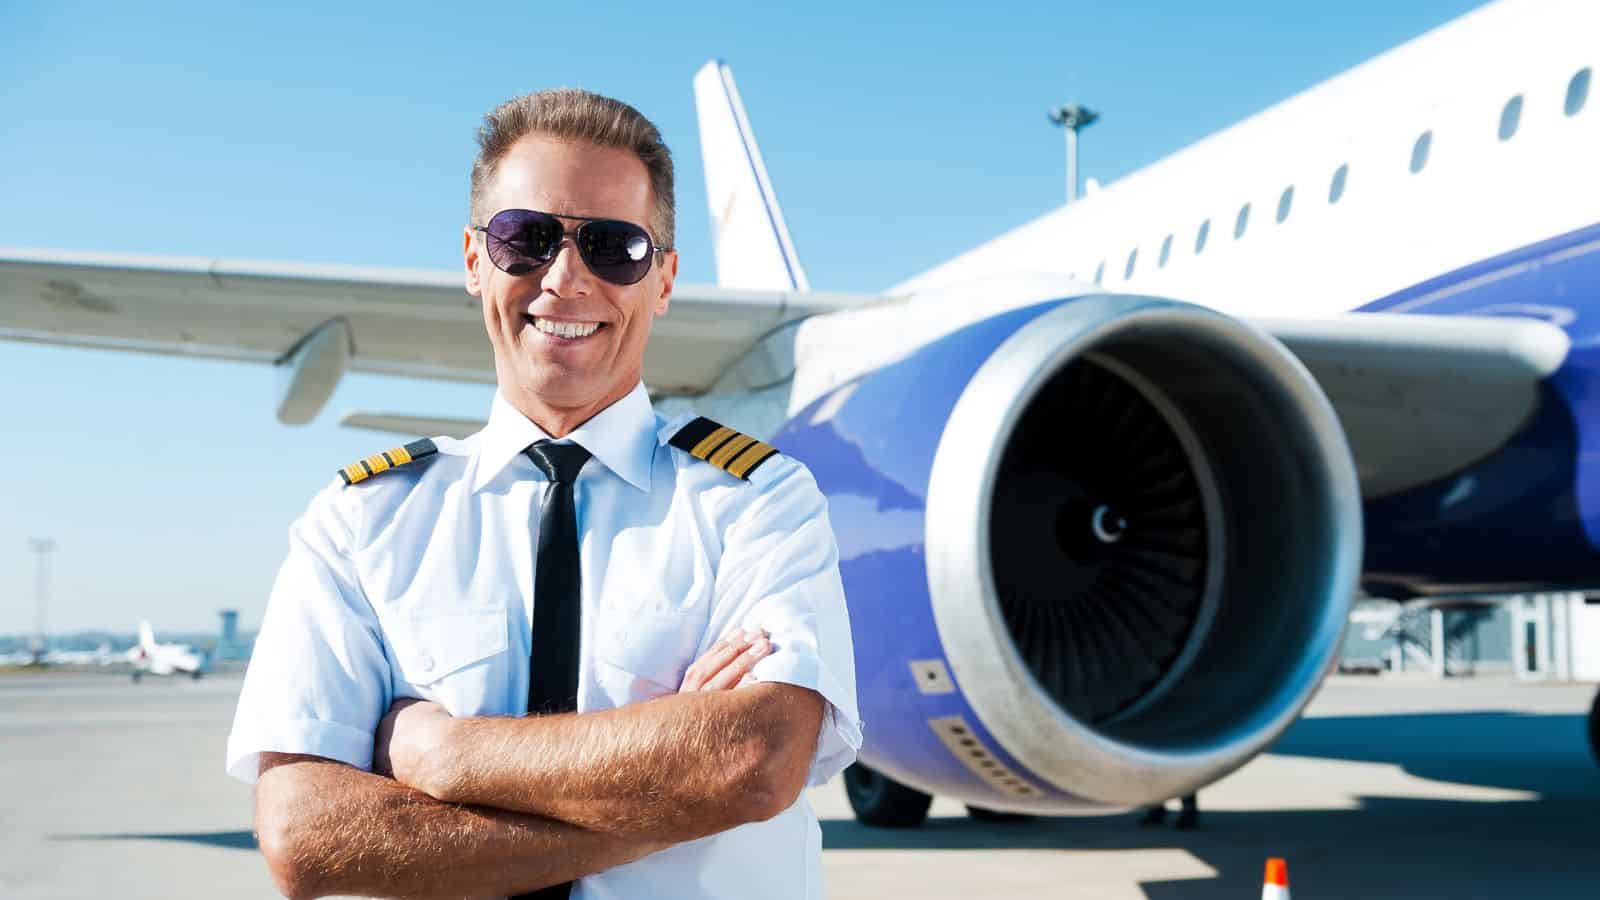 <p>Airline pilots fly and manage planes, making sure passengers are safe and comfortable. They go through advanced training and get paid well for their responsibilities. Many work for commercial airlines, enjoying travel perks, job stability, and chances to move up the career ladder.</p>